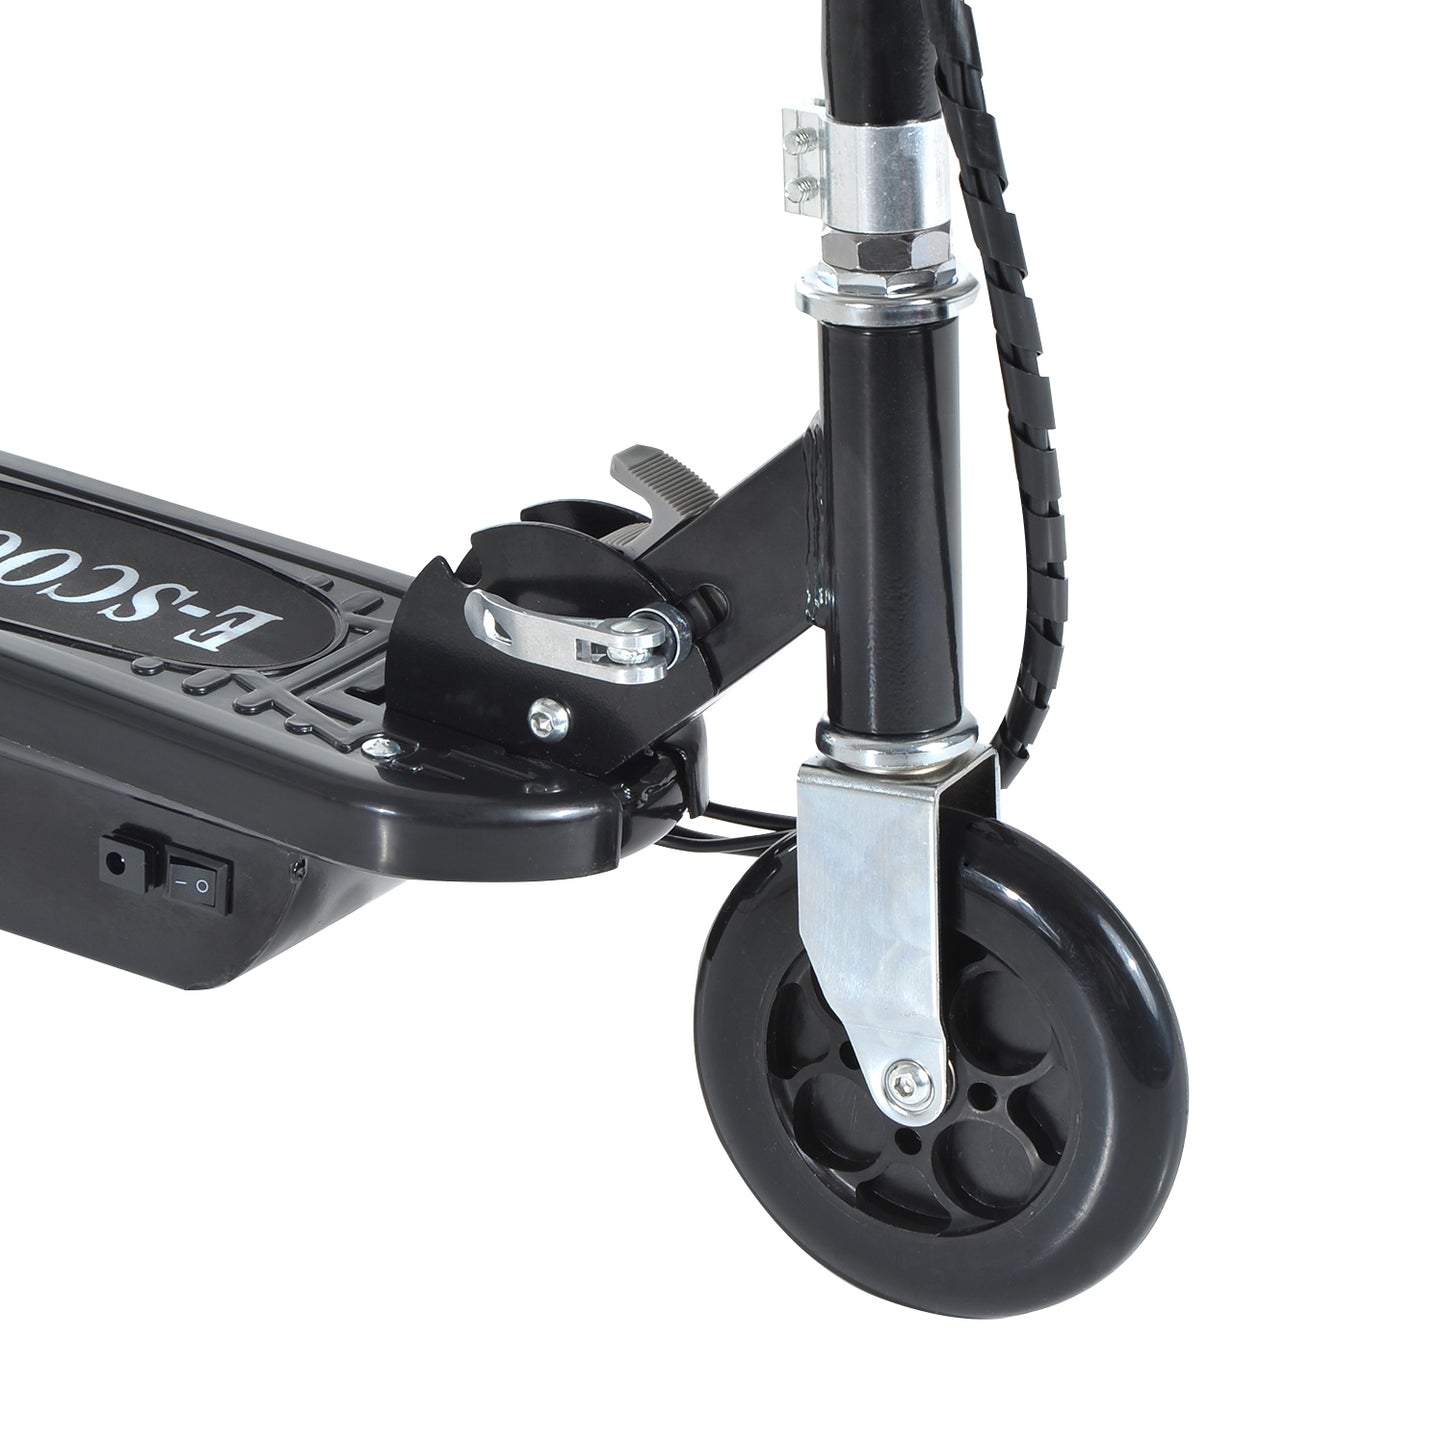 HOMCOM Motorized Electric Scooter, Rechargeable Battery-Black